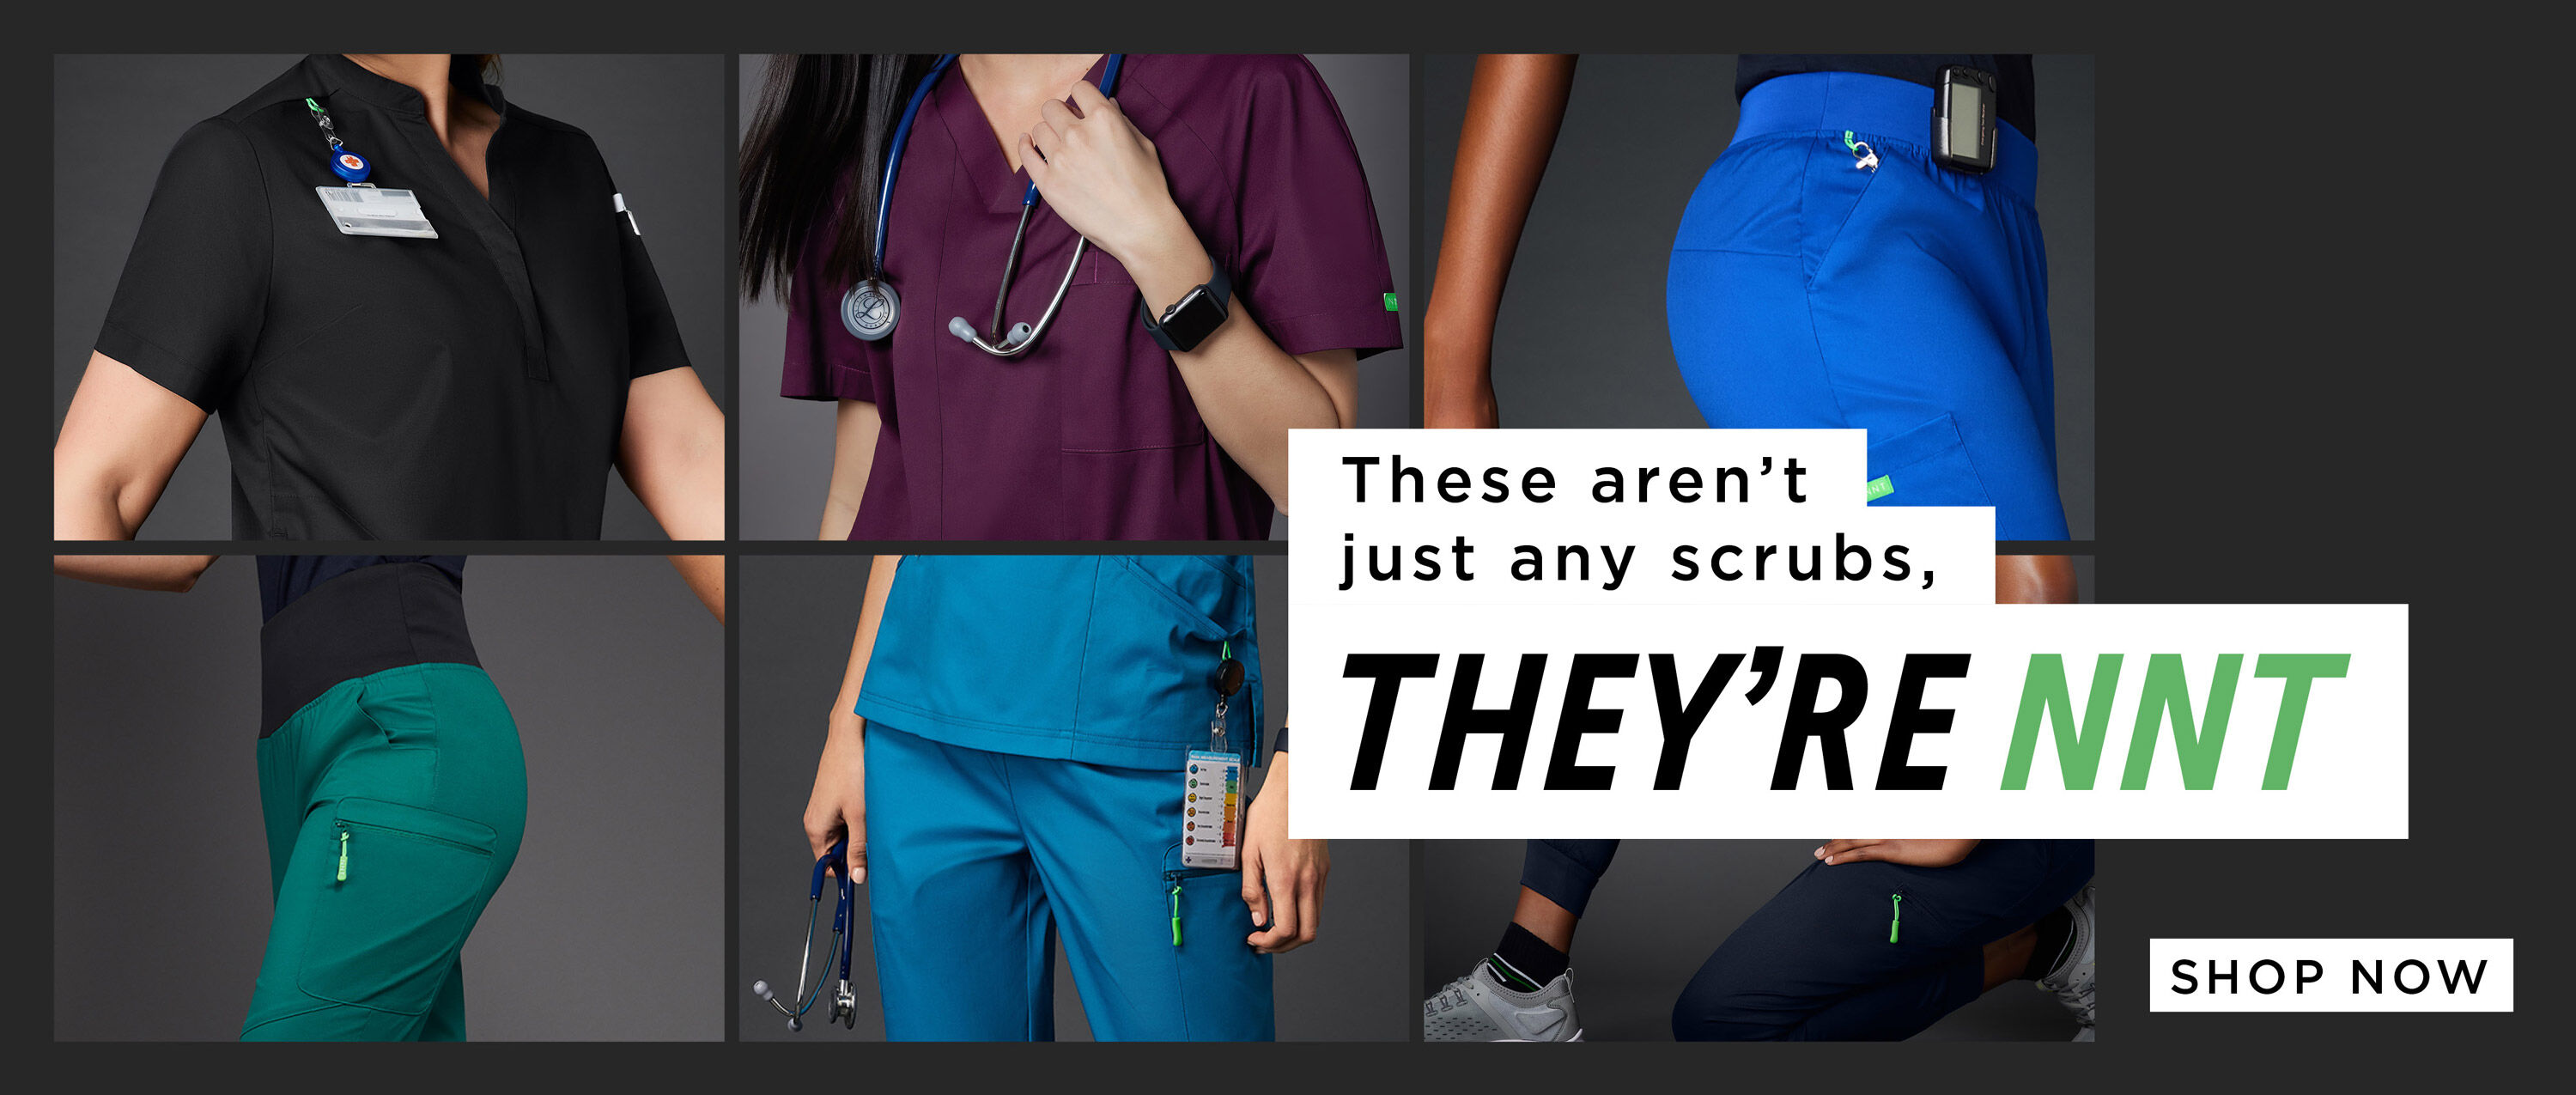 These aren't just any scrubs, THEY'RE NNT